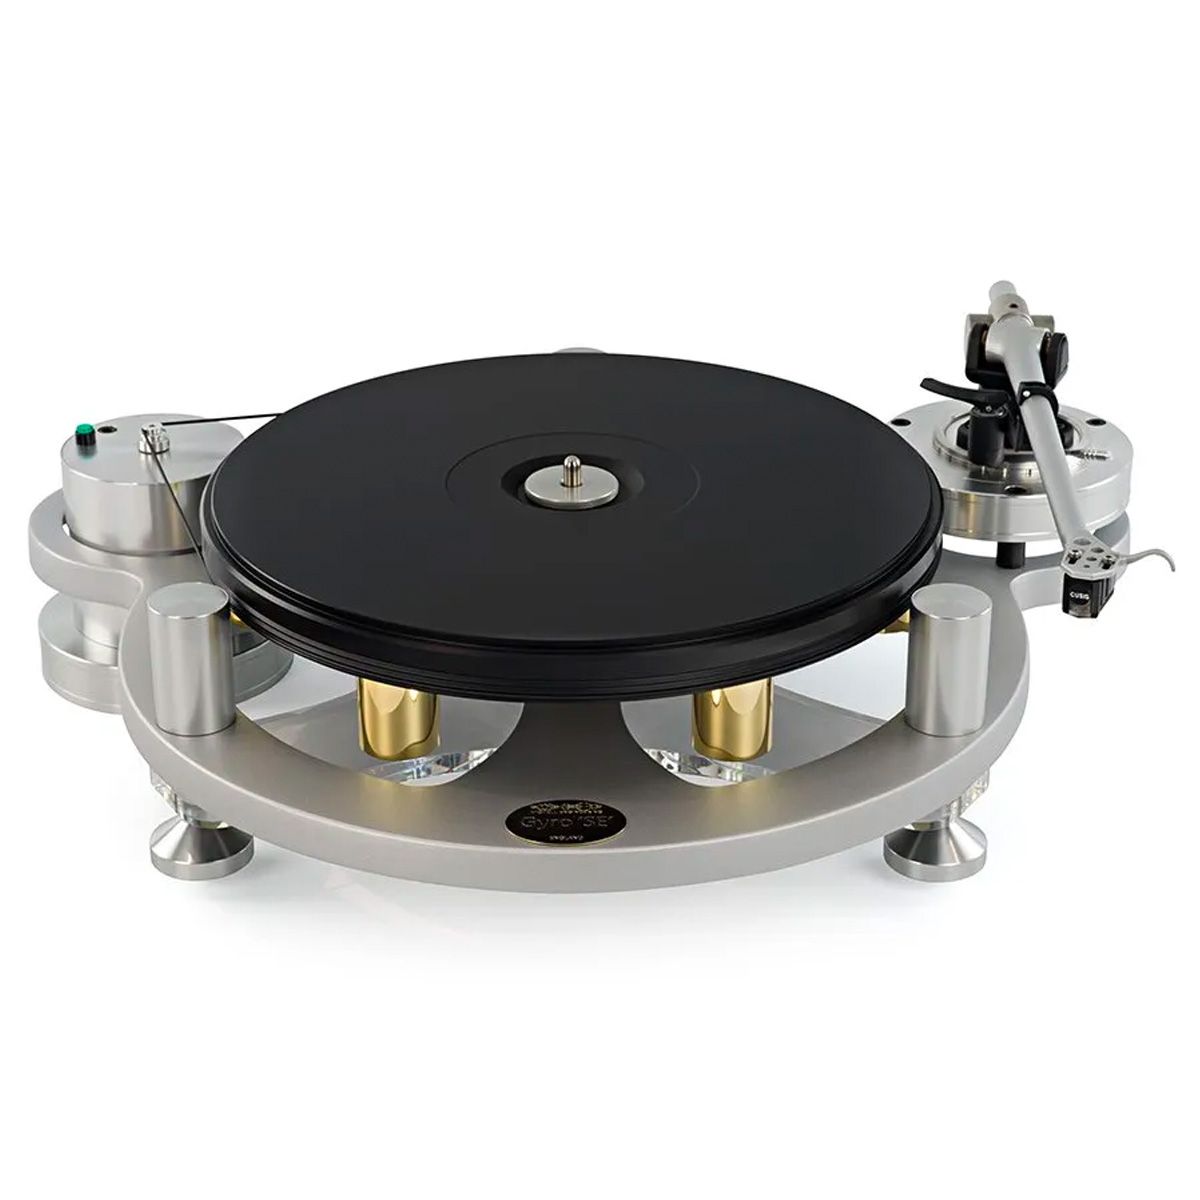 MICHELL GYRO SE Turntable side view in silver

